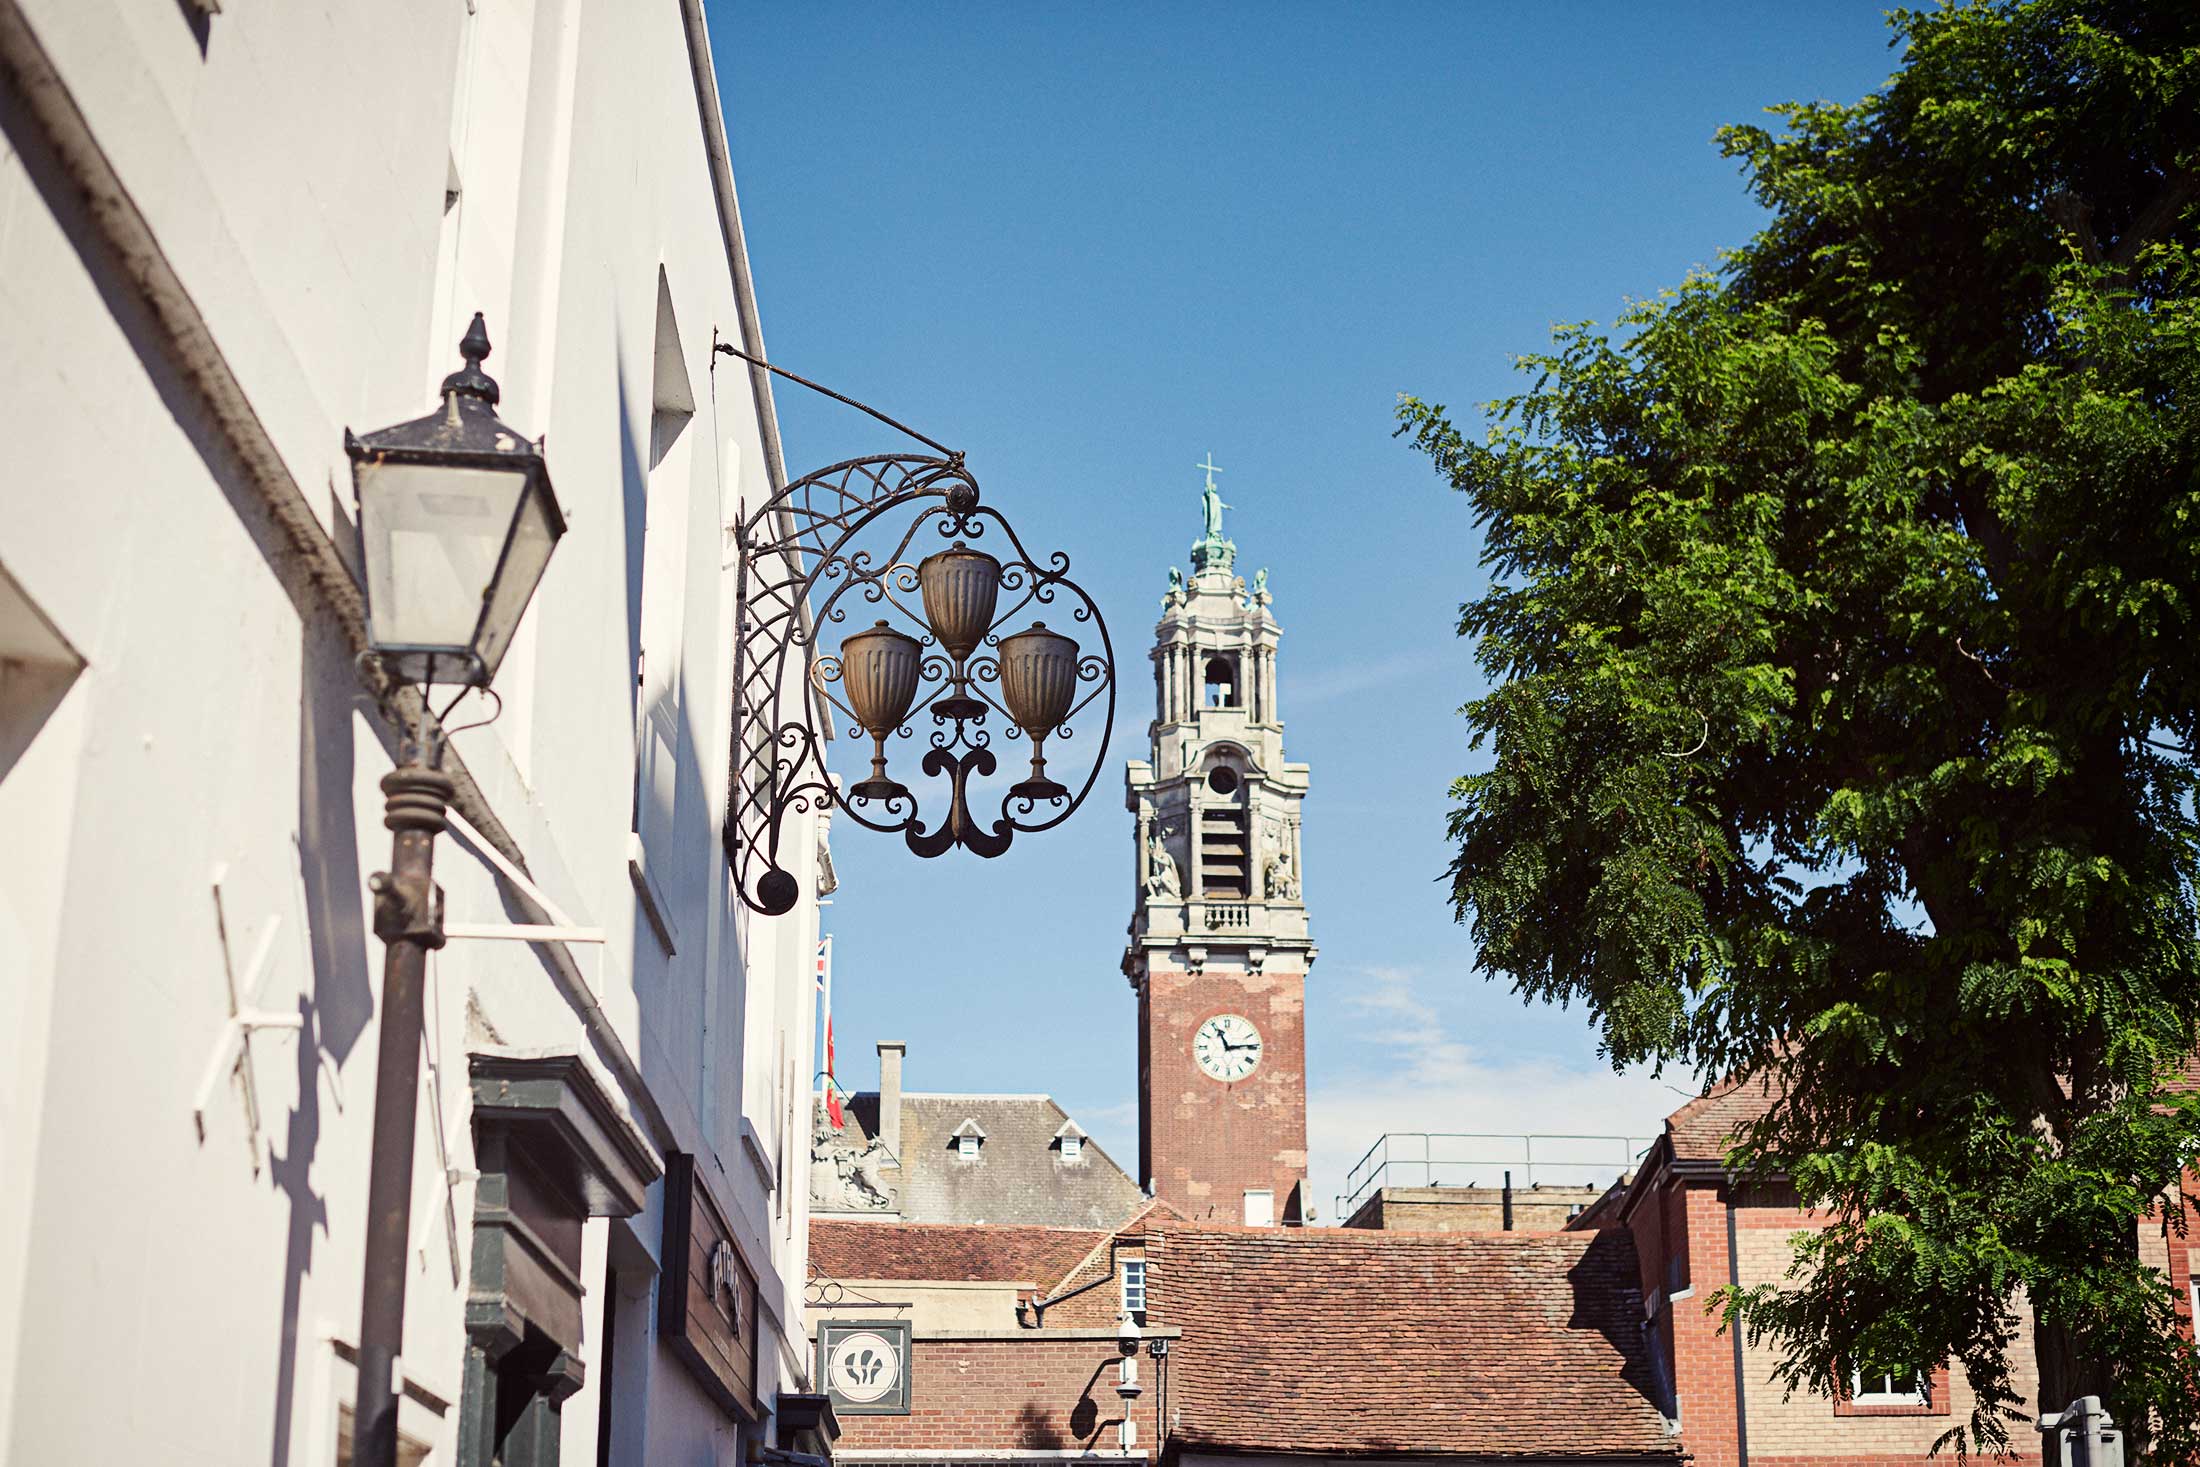 Town architecture and clock tower - Colchester - Beresfords Estate agents - Essex